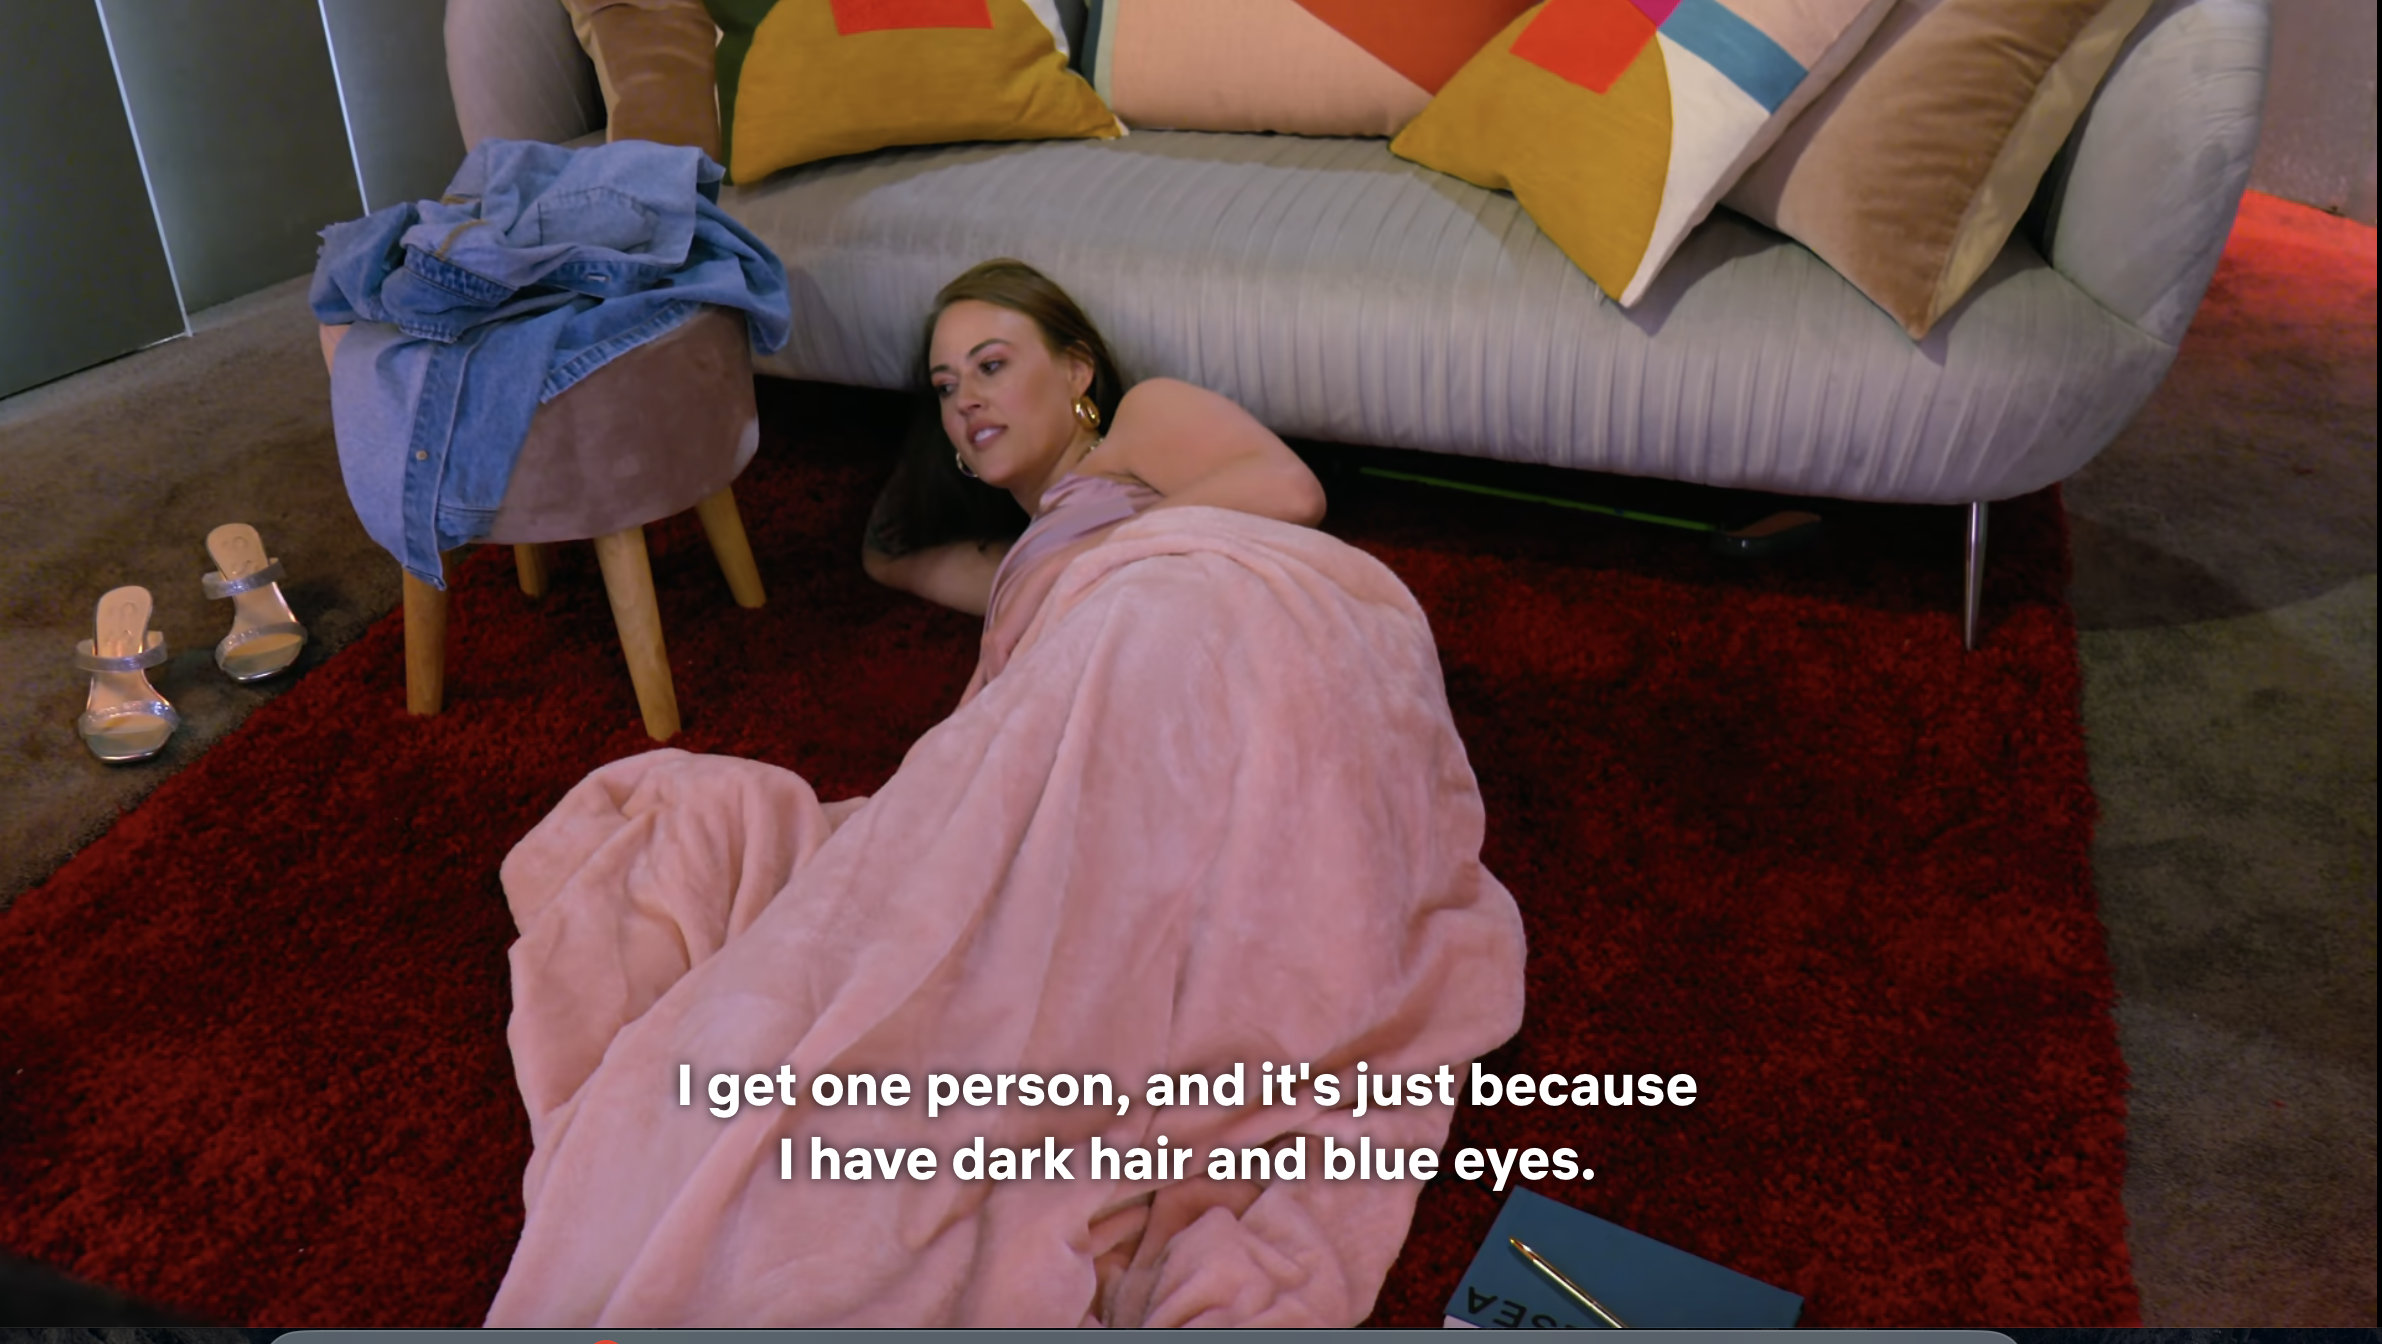 Person in a floor-length pink gown lying on a couch, speaking, with caption about having dark hair and blue eyes